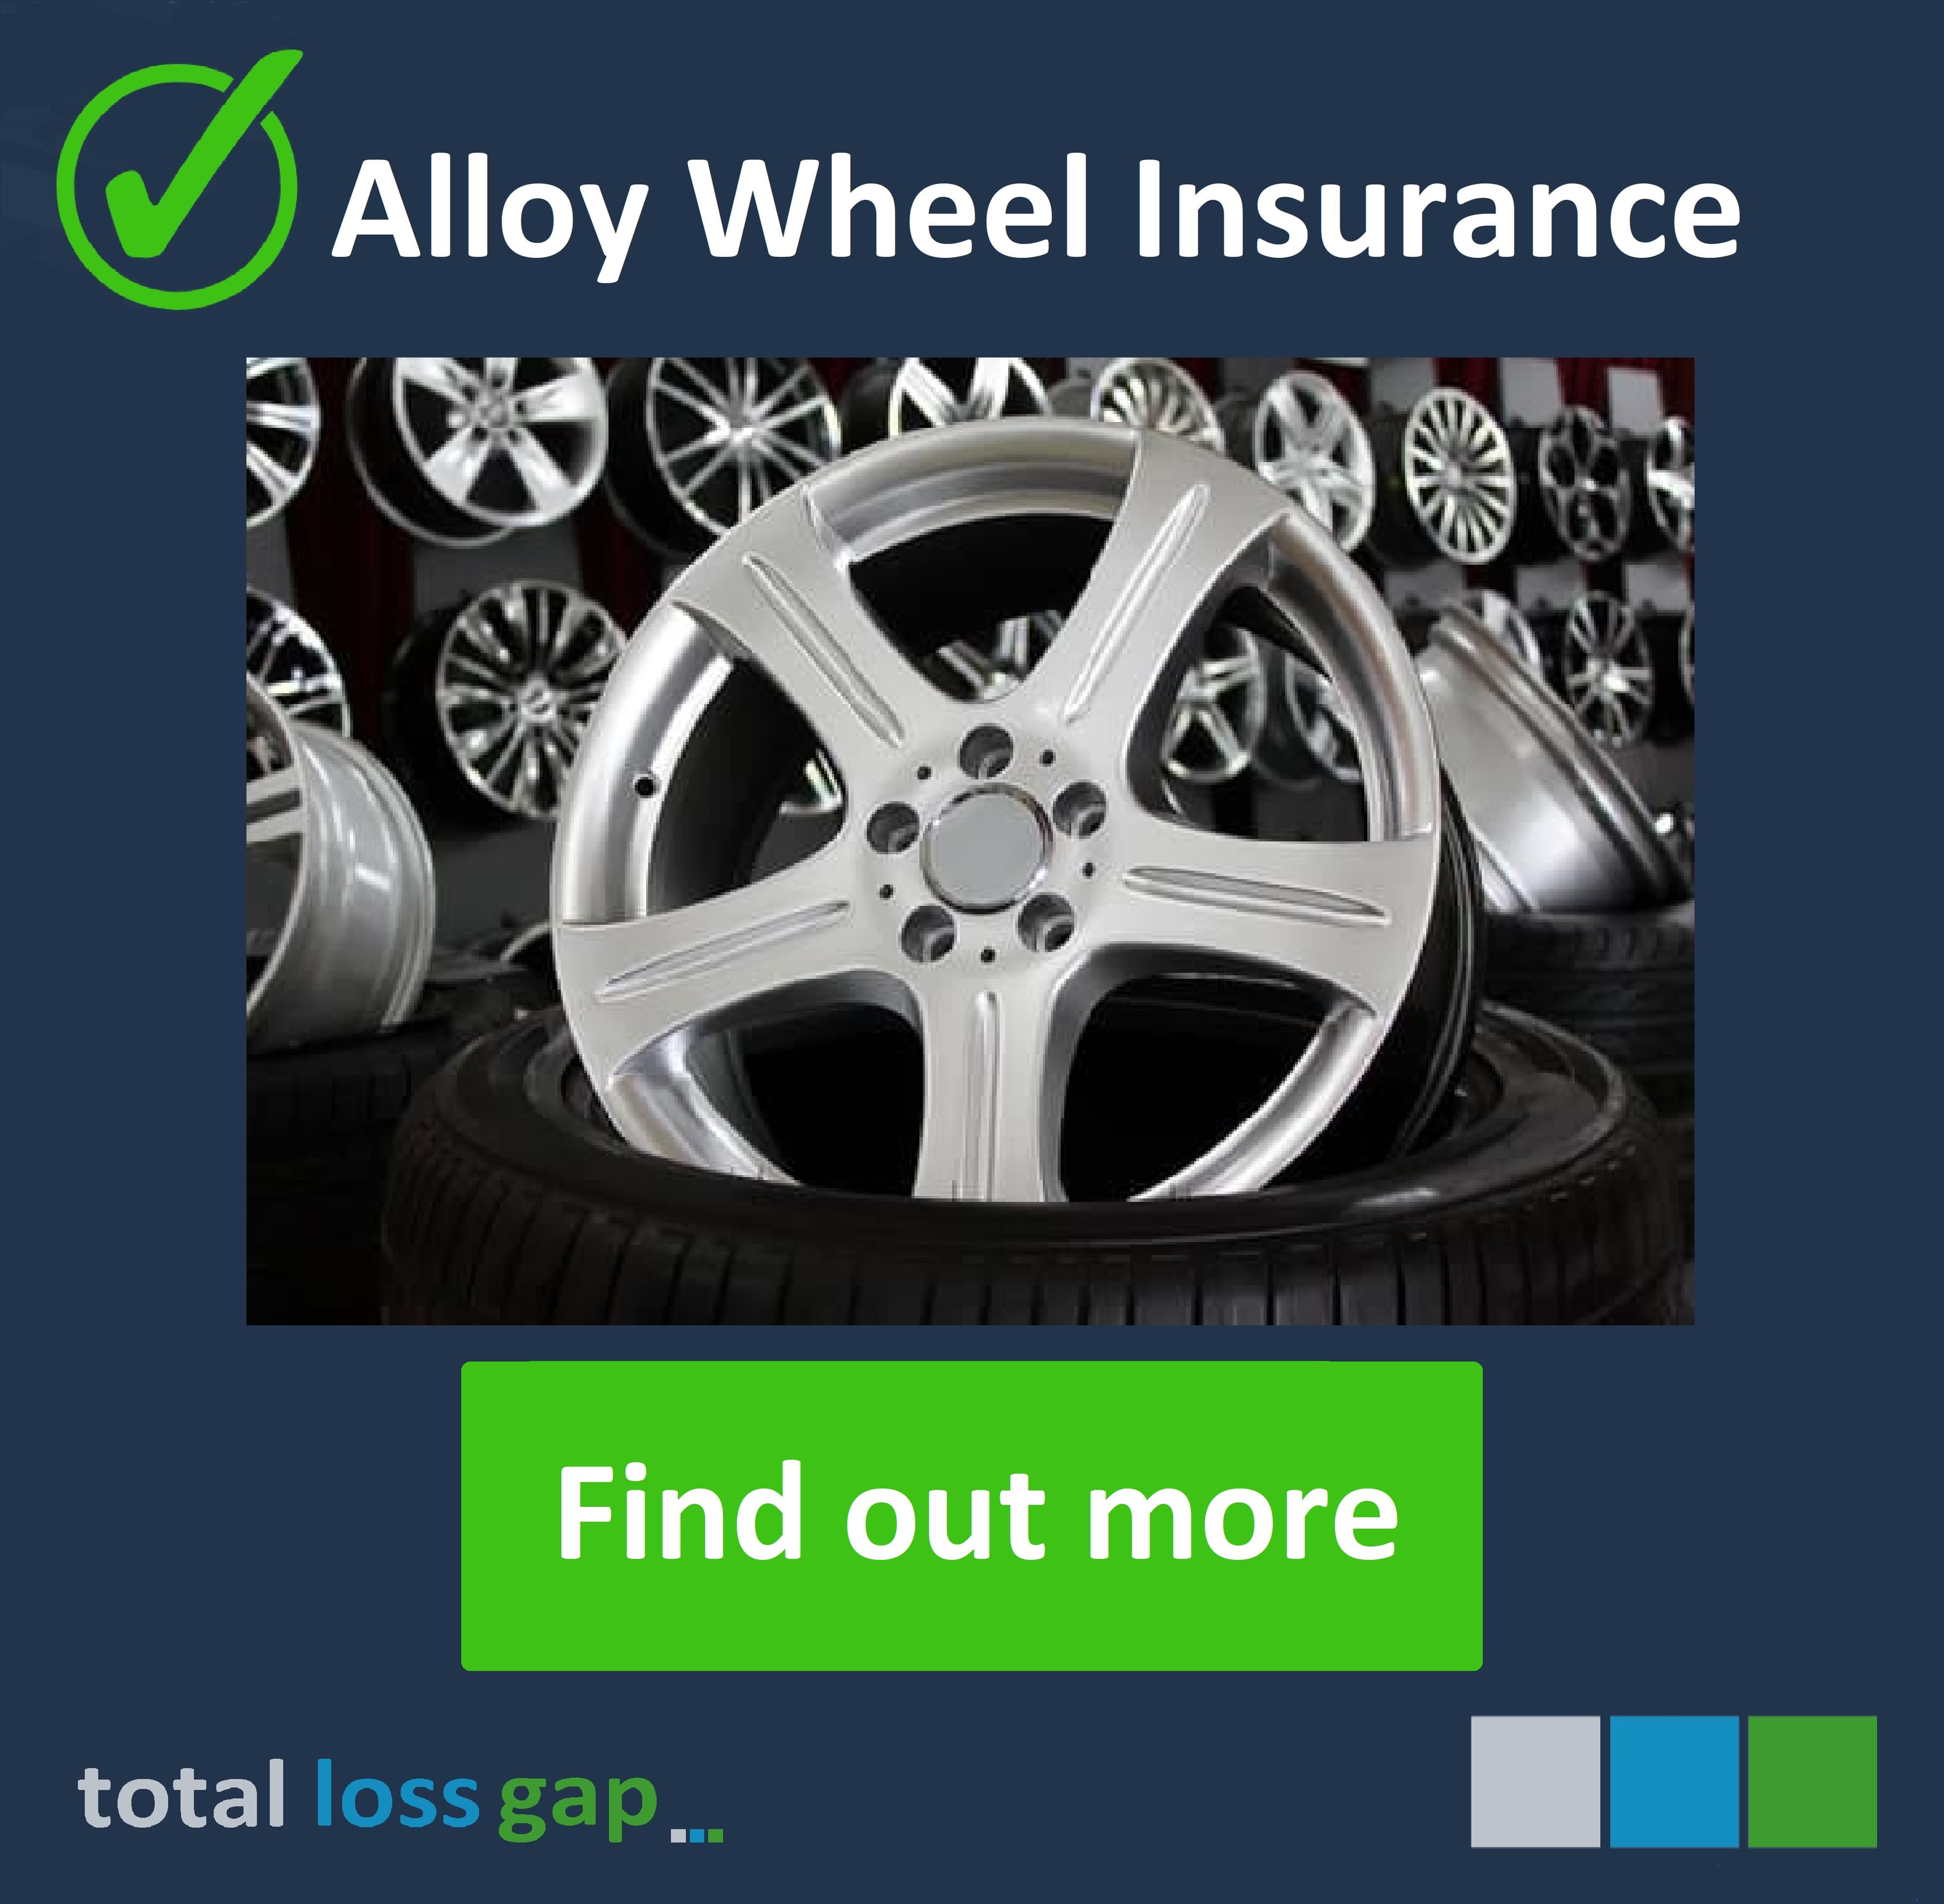 Find out more about Alloy Wheel cover